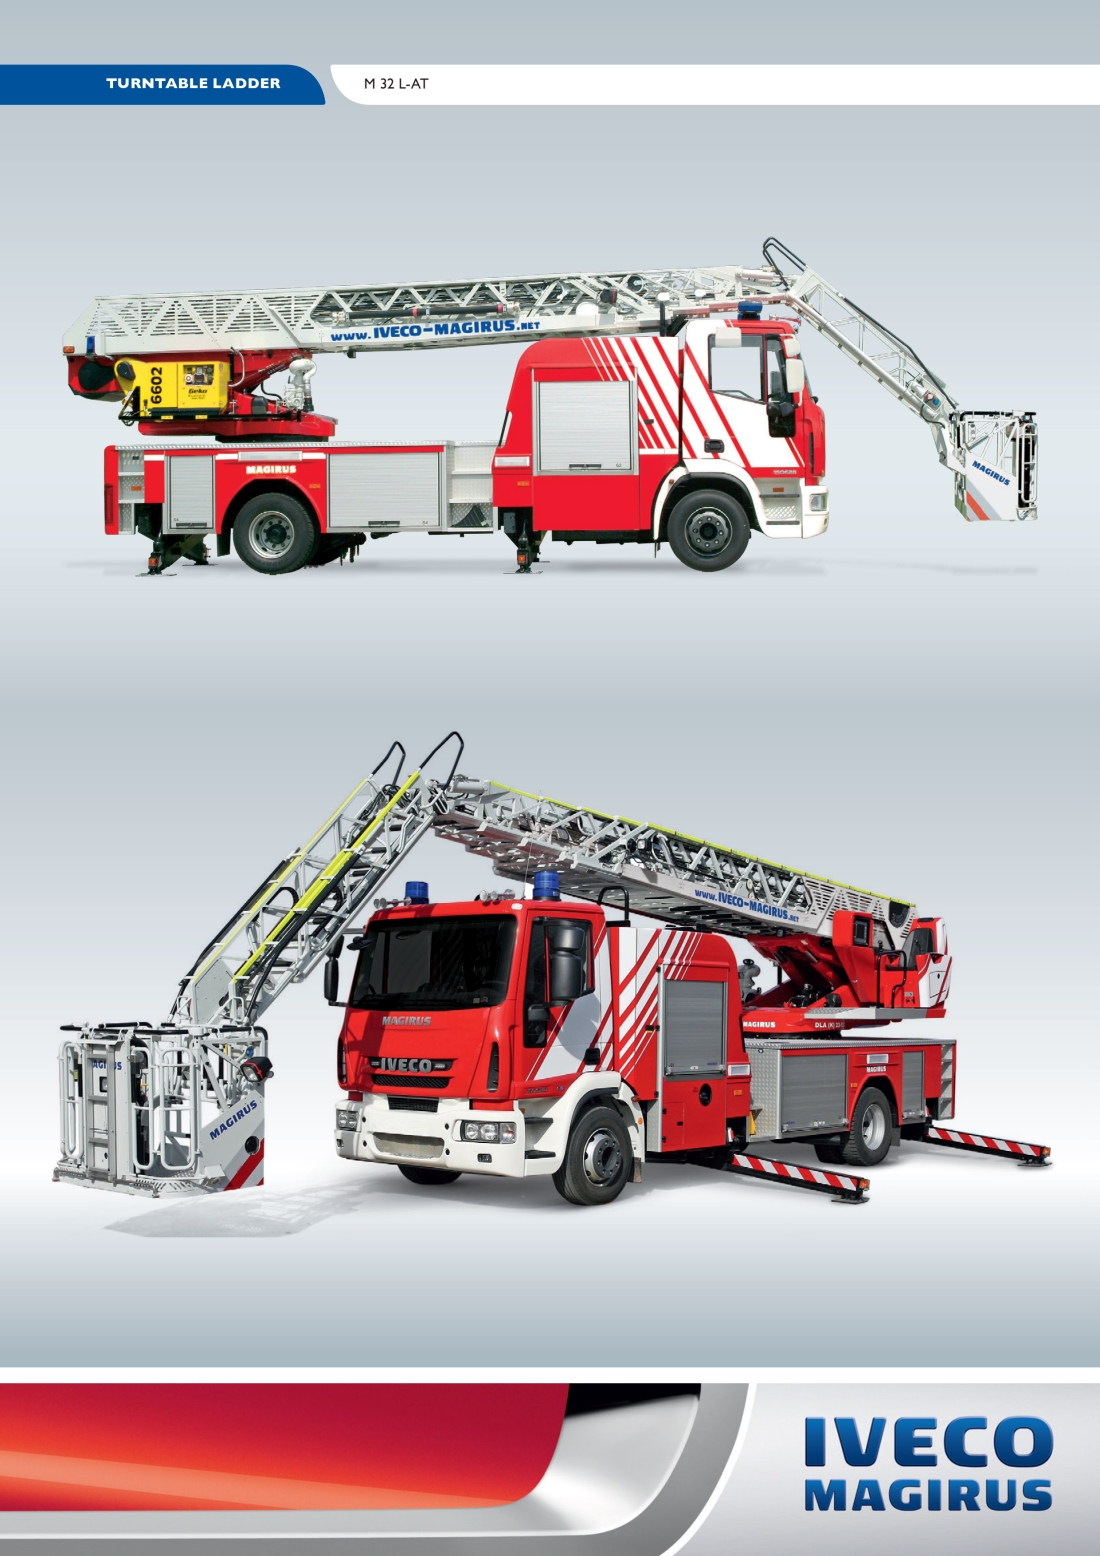 TURNTABLE LADDER M 32 L-AT front